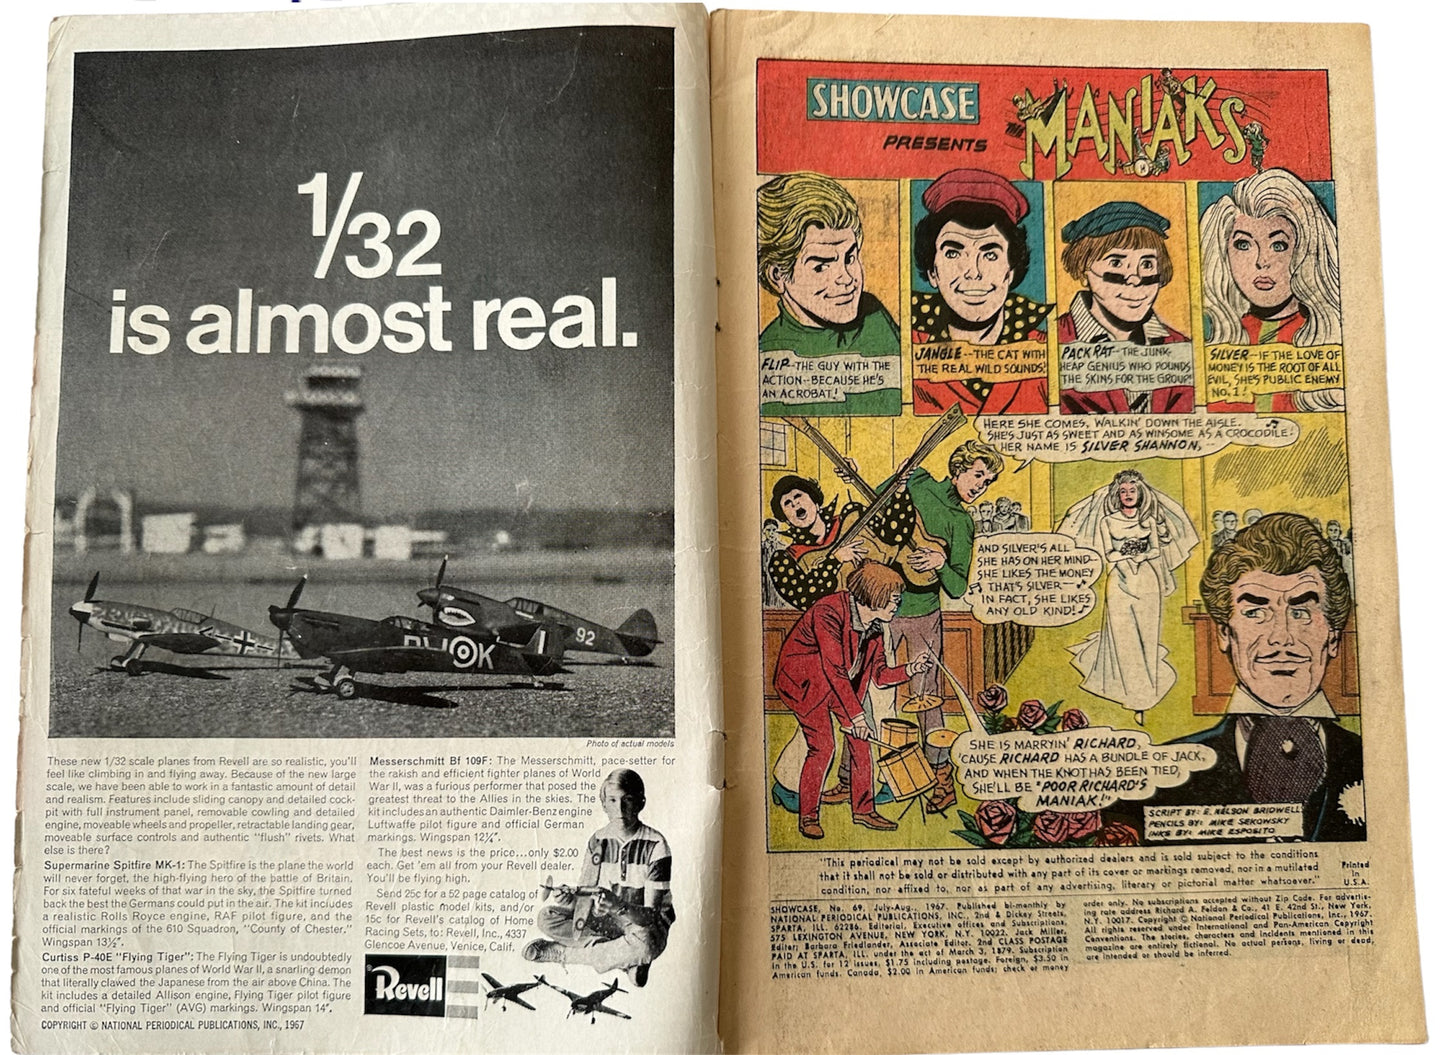 Vintage 1967 DC - Showcase Presents Comic Issue Number 69 - The Maniaks - Good Condition Vintage Comic